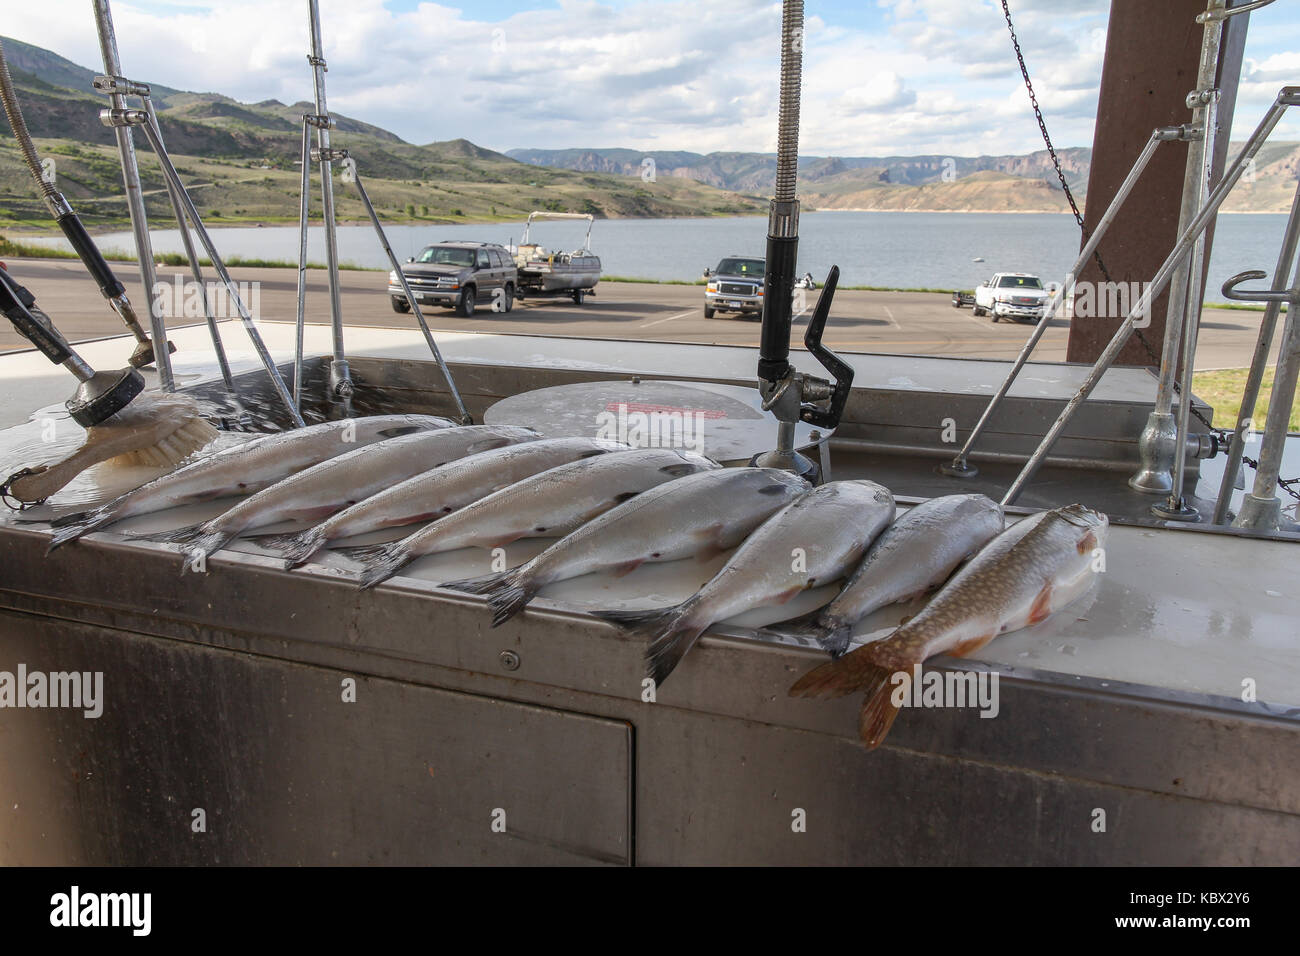 Fresh caught Kokanee Salmon and a lake trout (Mackinaw) on a cleaning table.  Caught at Blue Mesa Reservoir, Gunnison Colorado, USA. Stock Photo